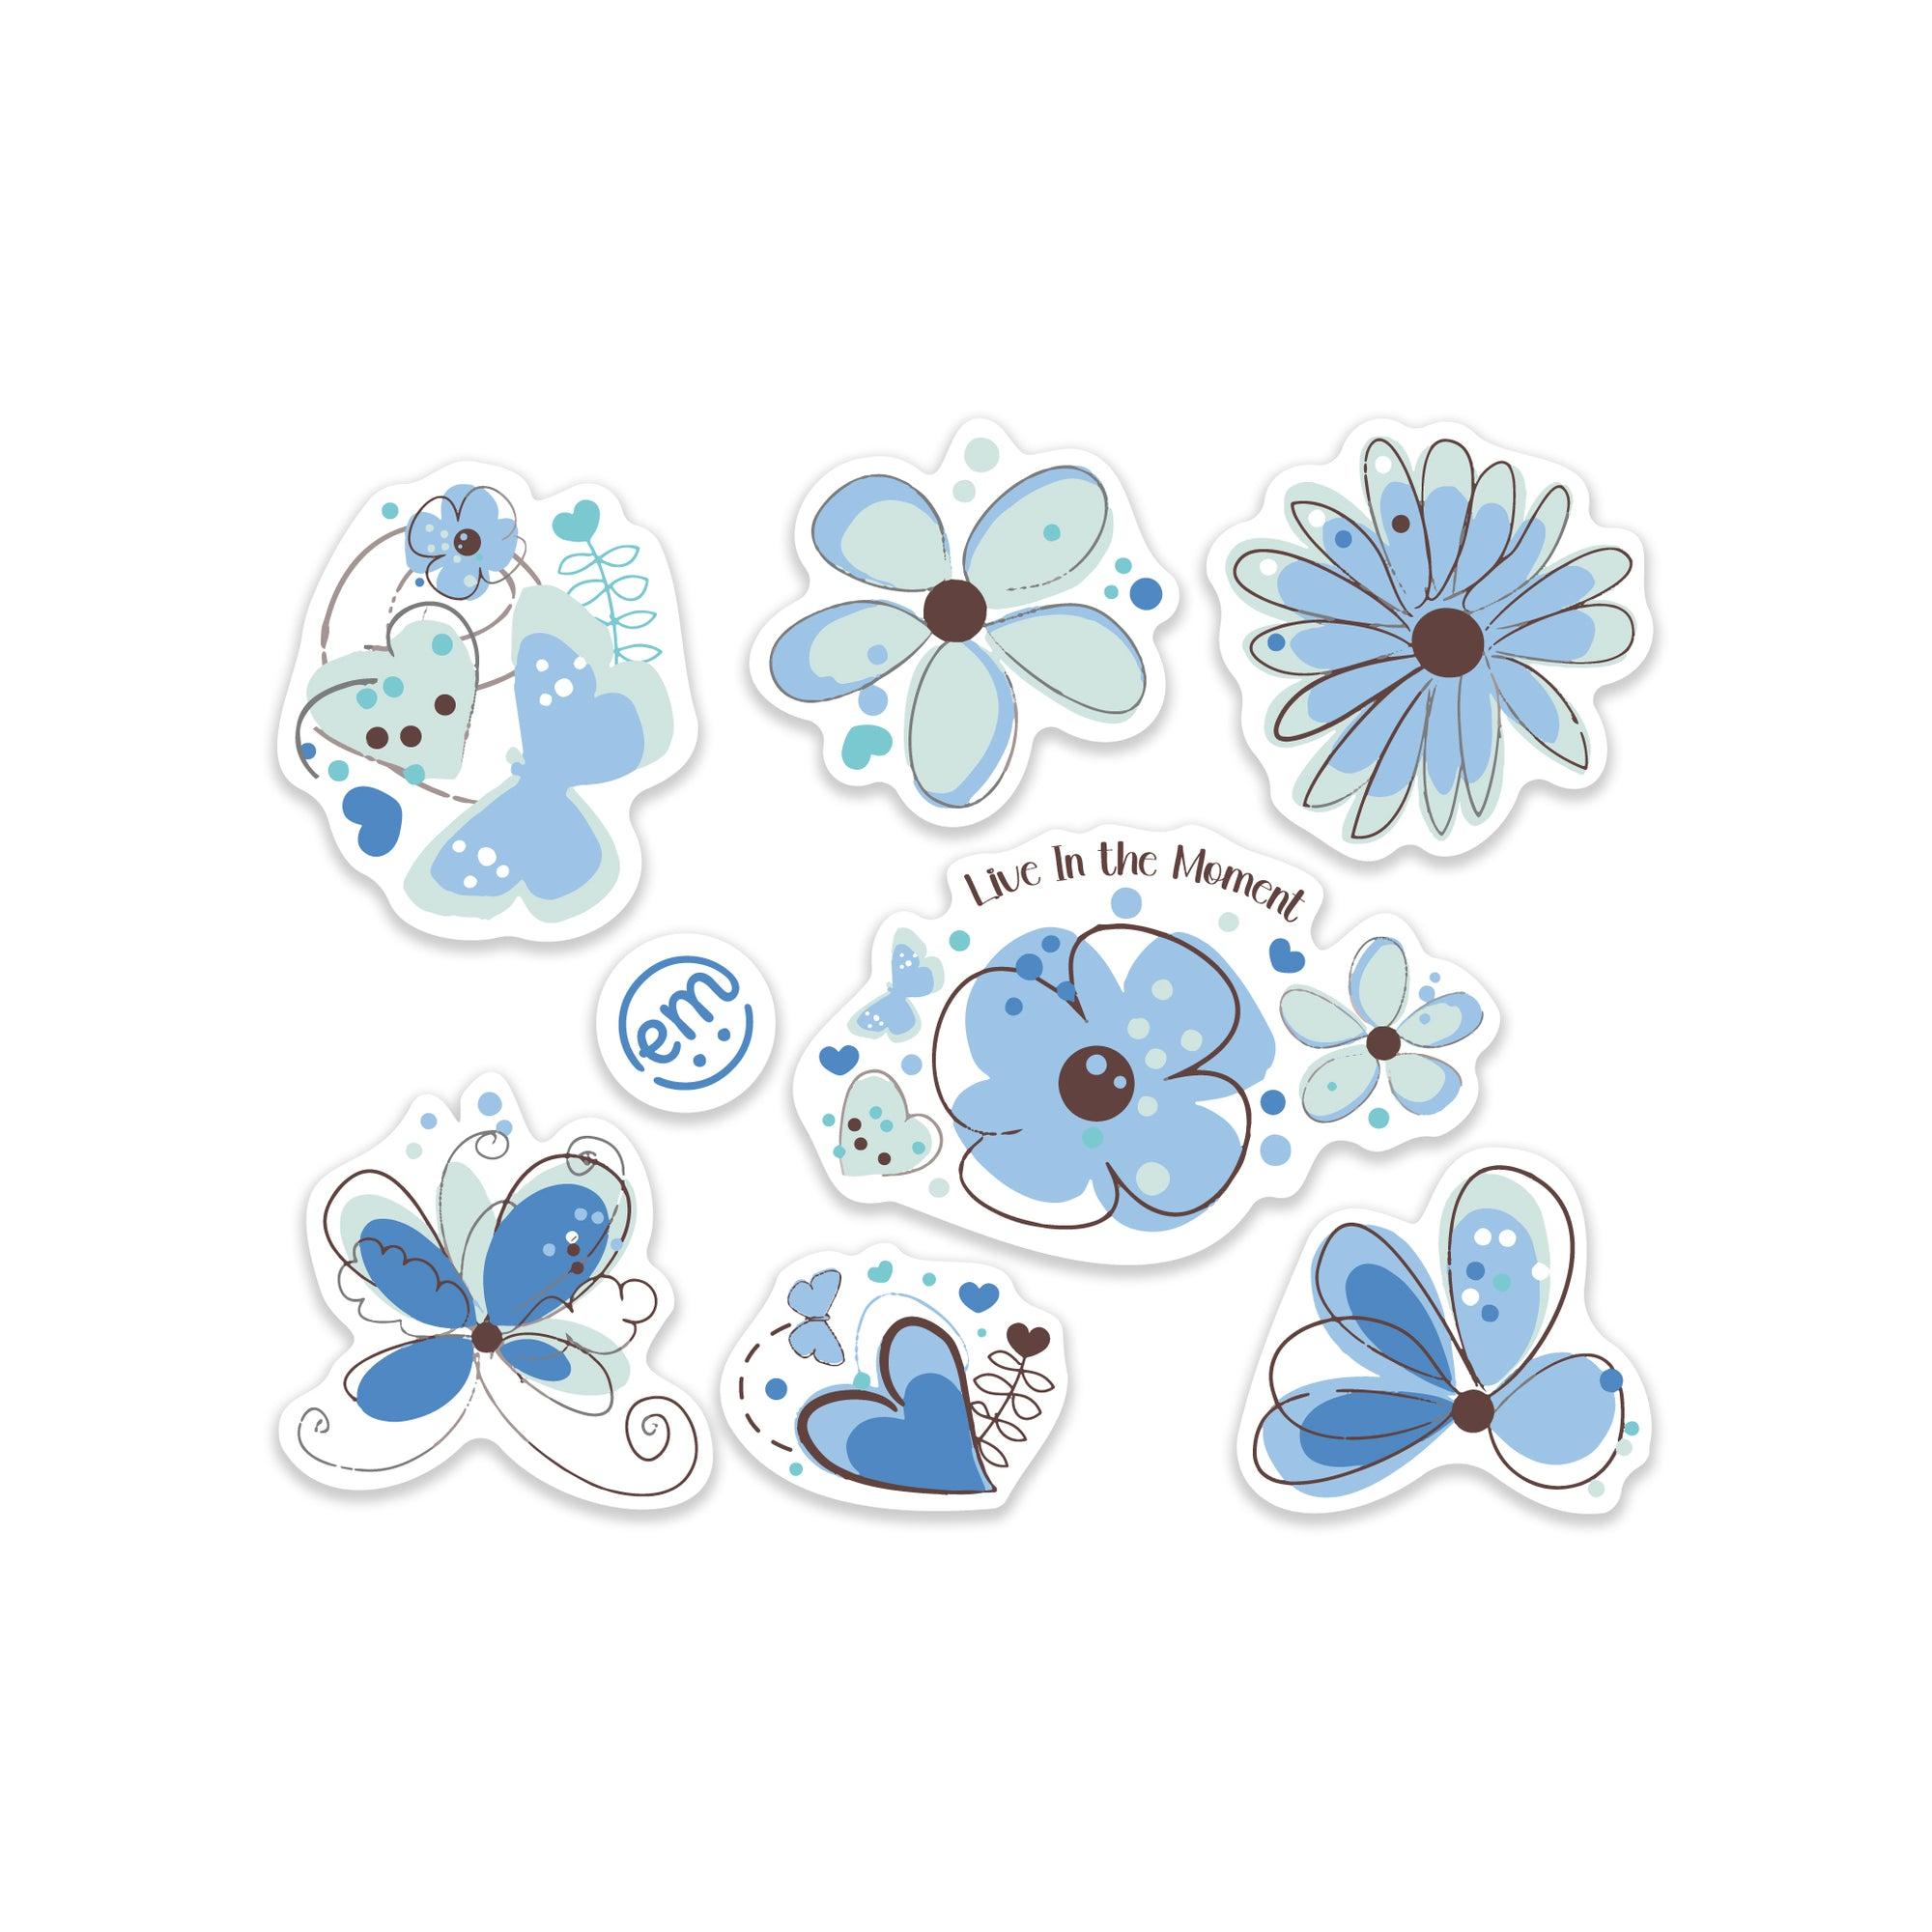 ExpressionMed Cute Blue Flowers Decal Sticker Sheet